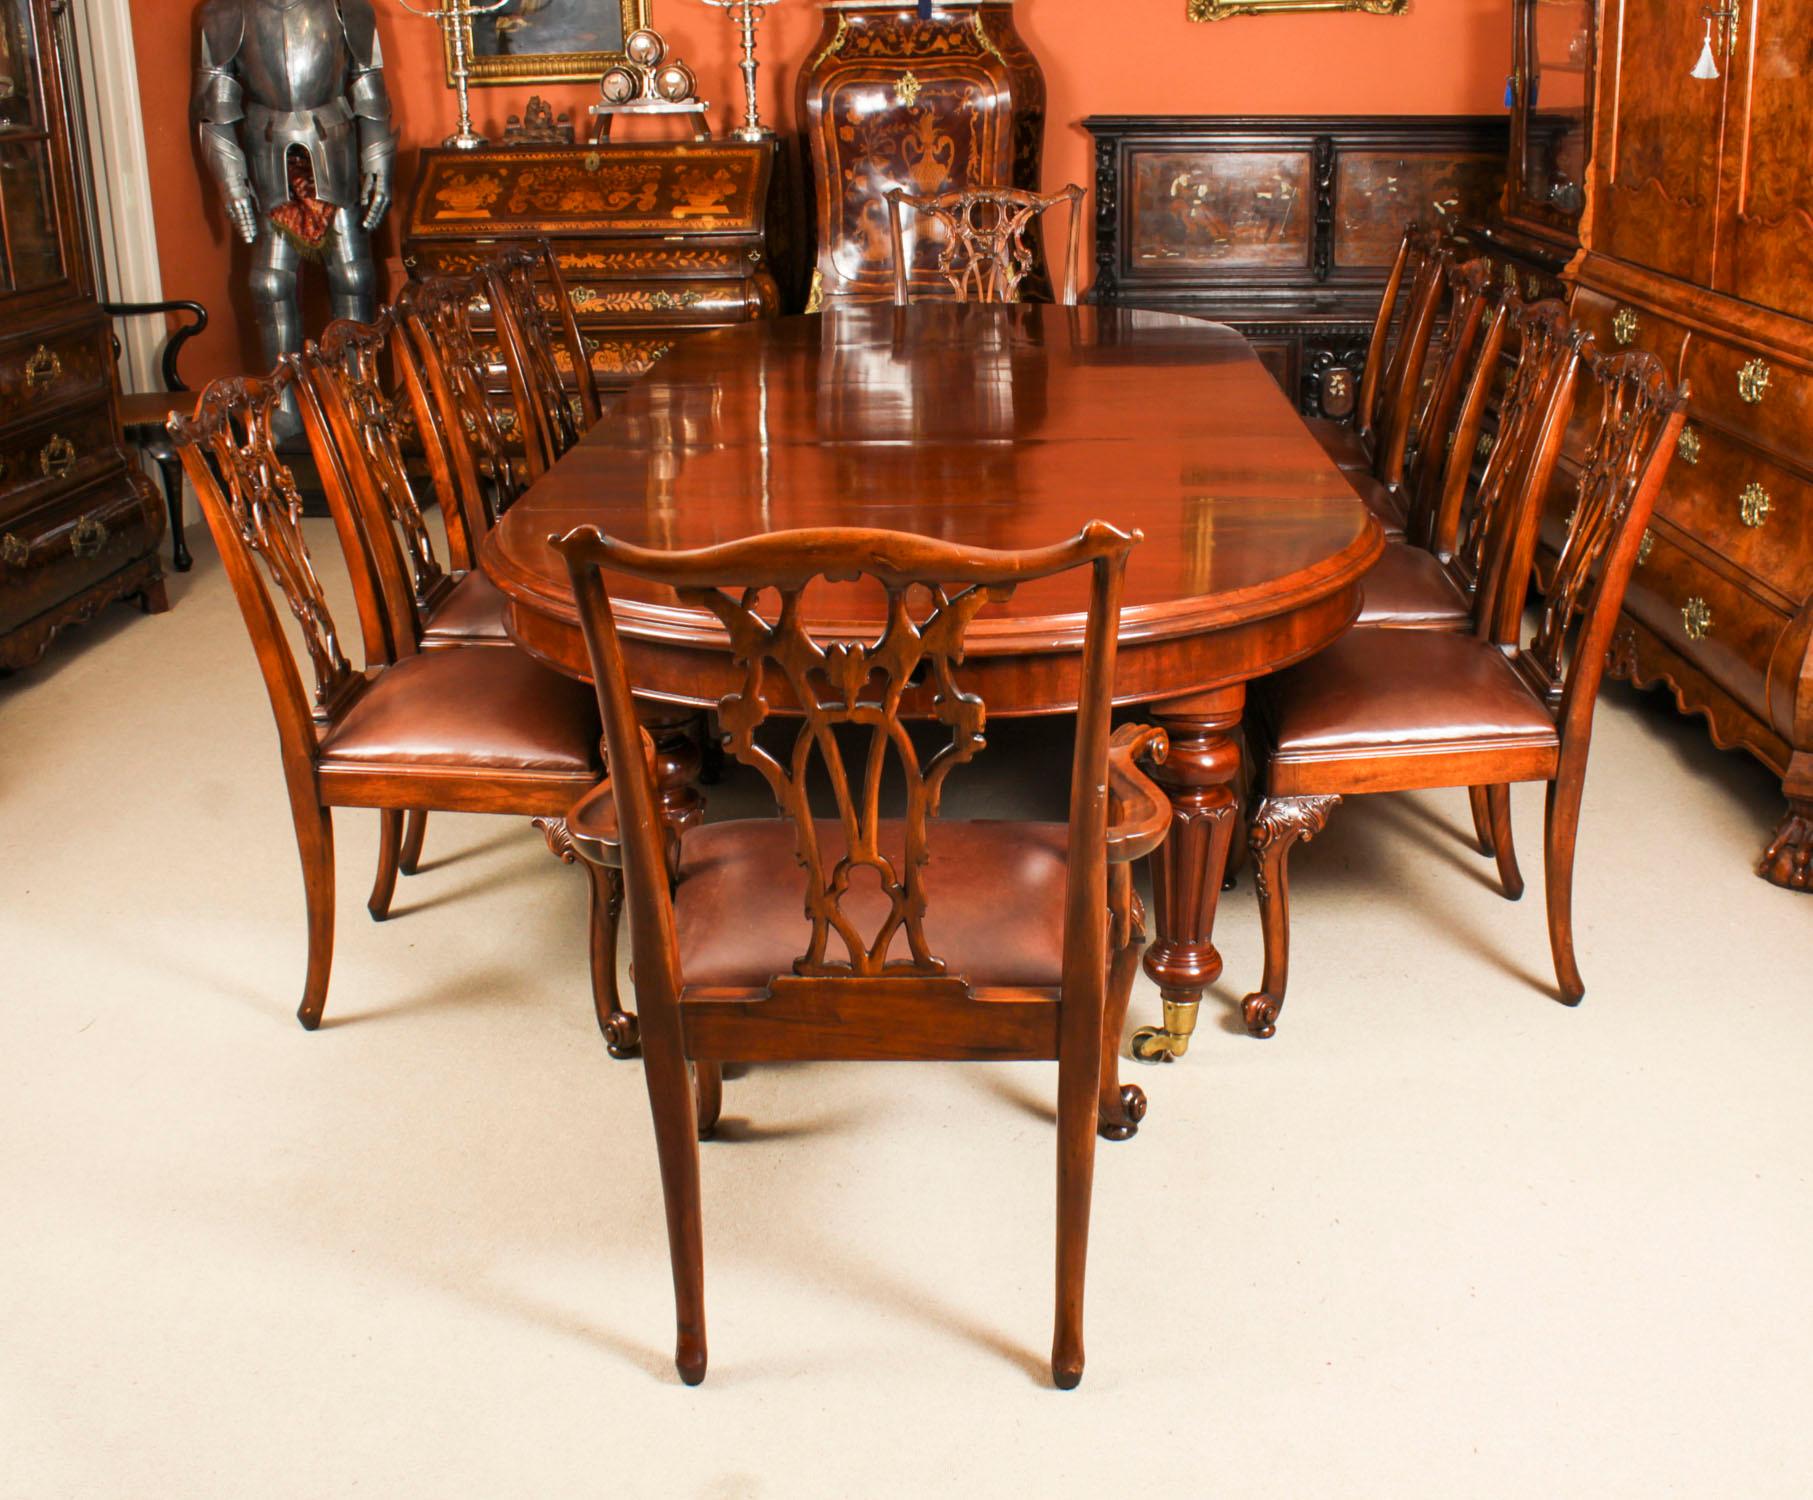 This is a fabulous antique Victorian flame mahogany extending dining table, circa 1860 in date and a matching set of  ten Chippendale Revival dining chairs. 

The table has three original leaves, can comfortably seat ten and has been hand-crafted